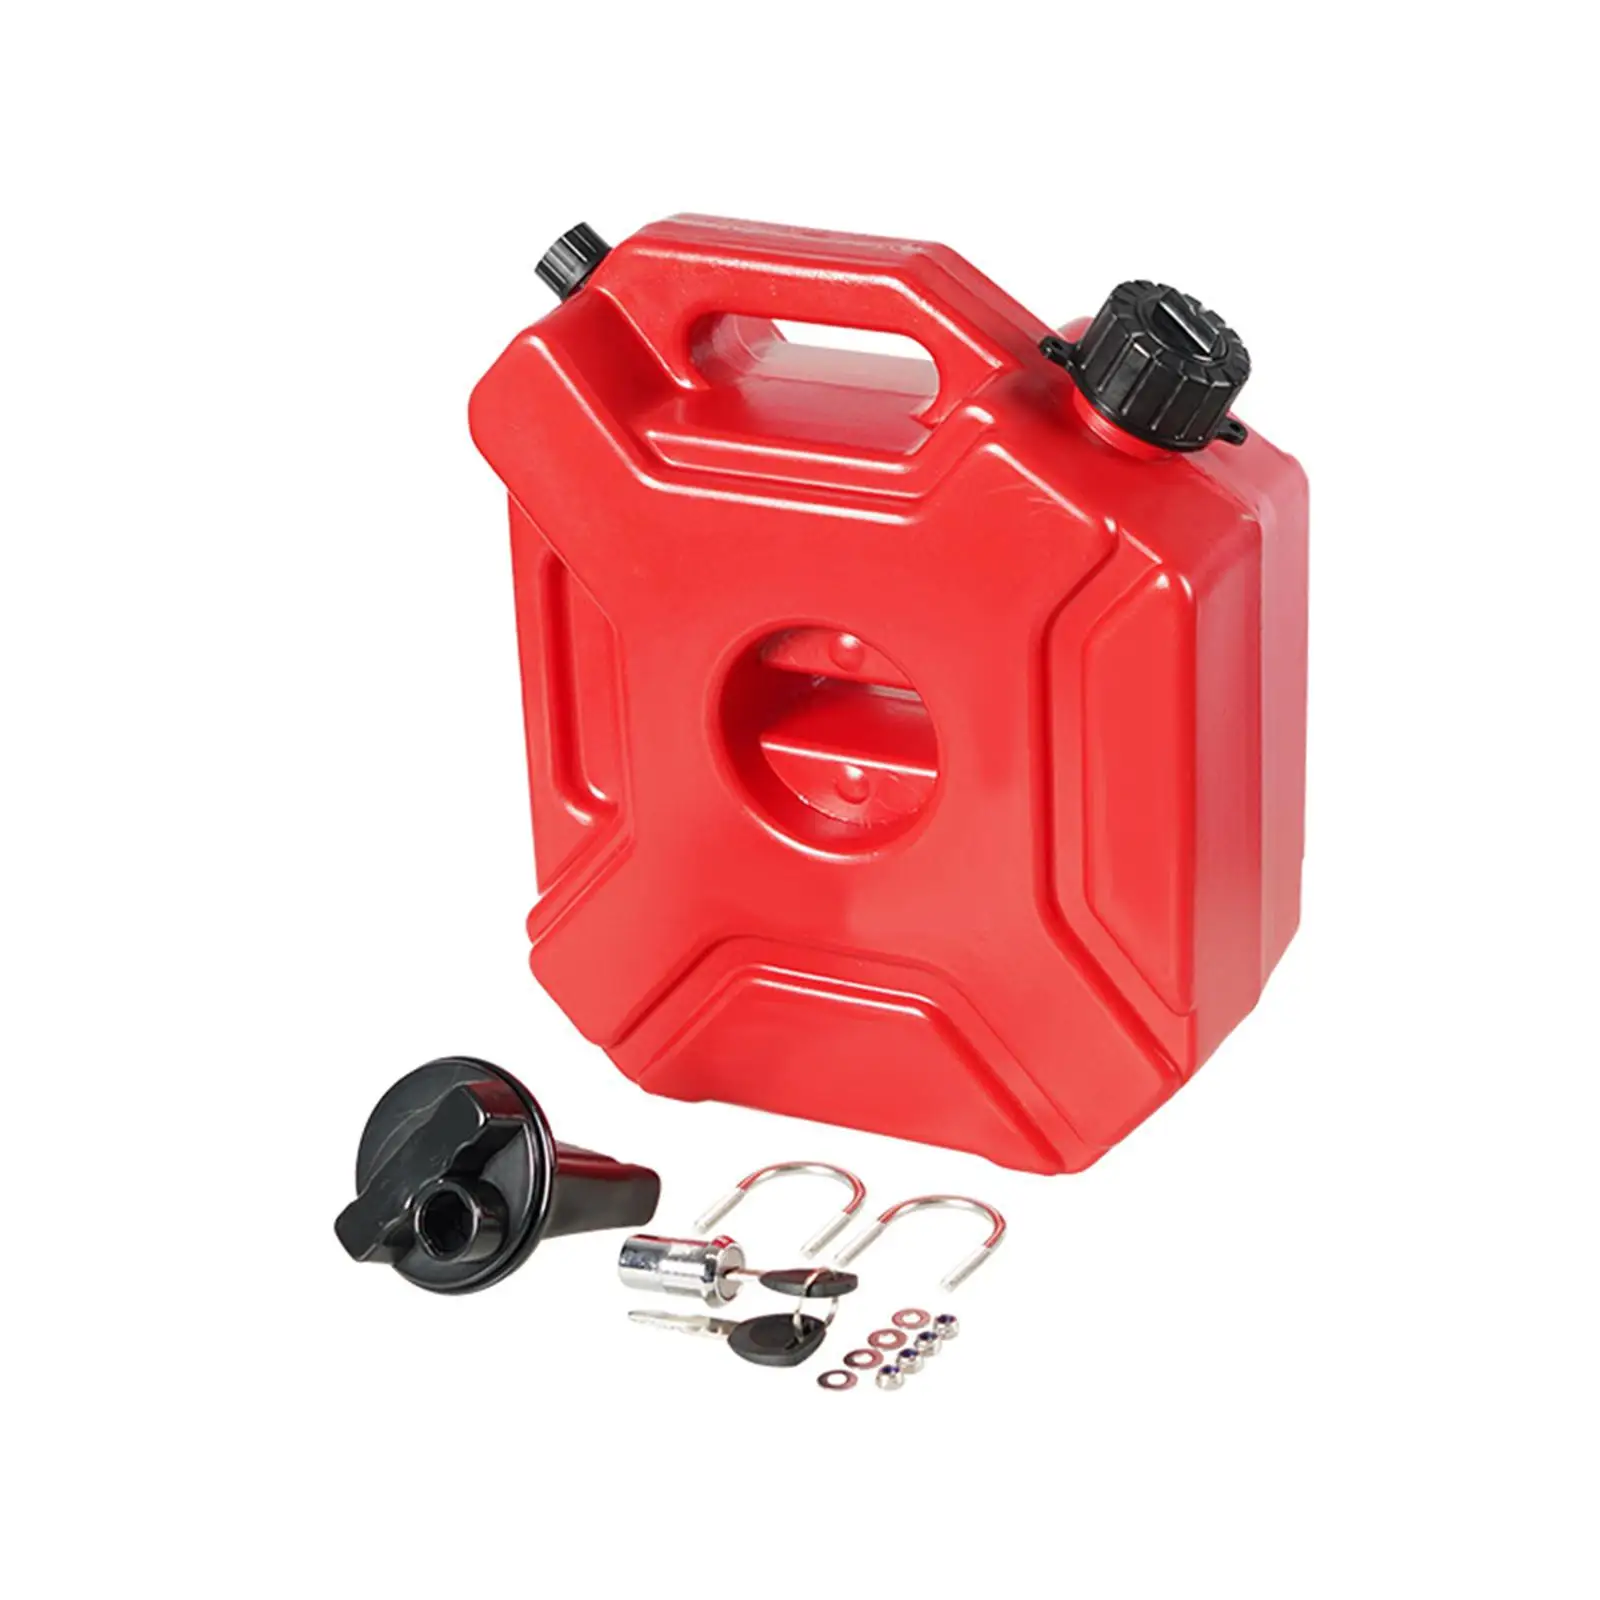 Gas Petrol Fuel Tank 5L Easy to Mount Fuel Tank Cans Spare Fuel Container for